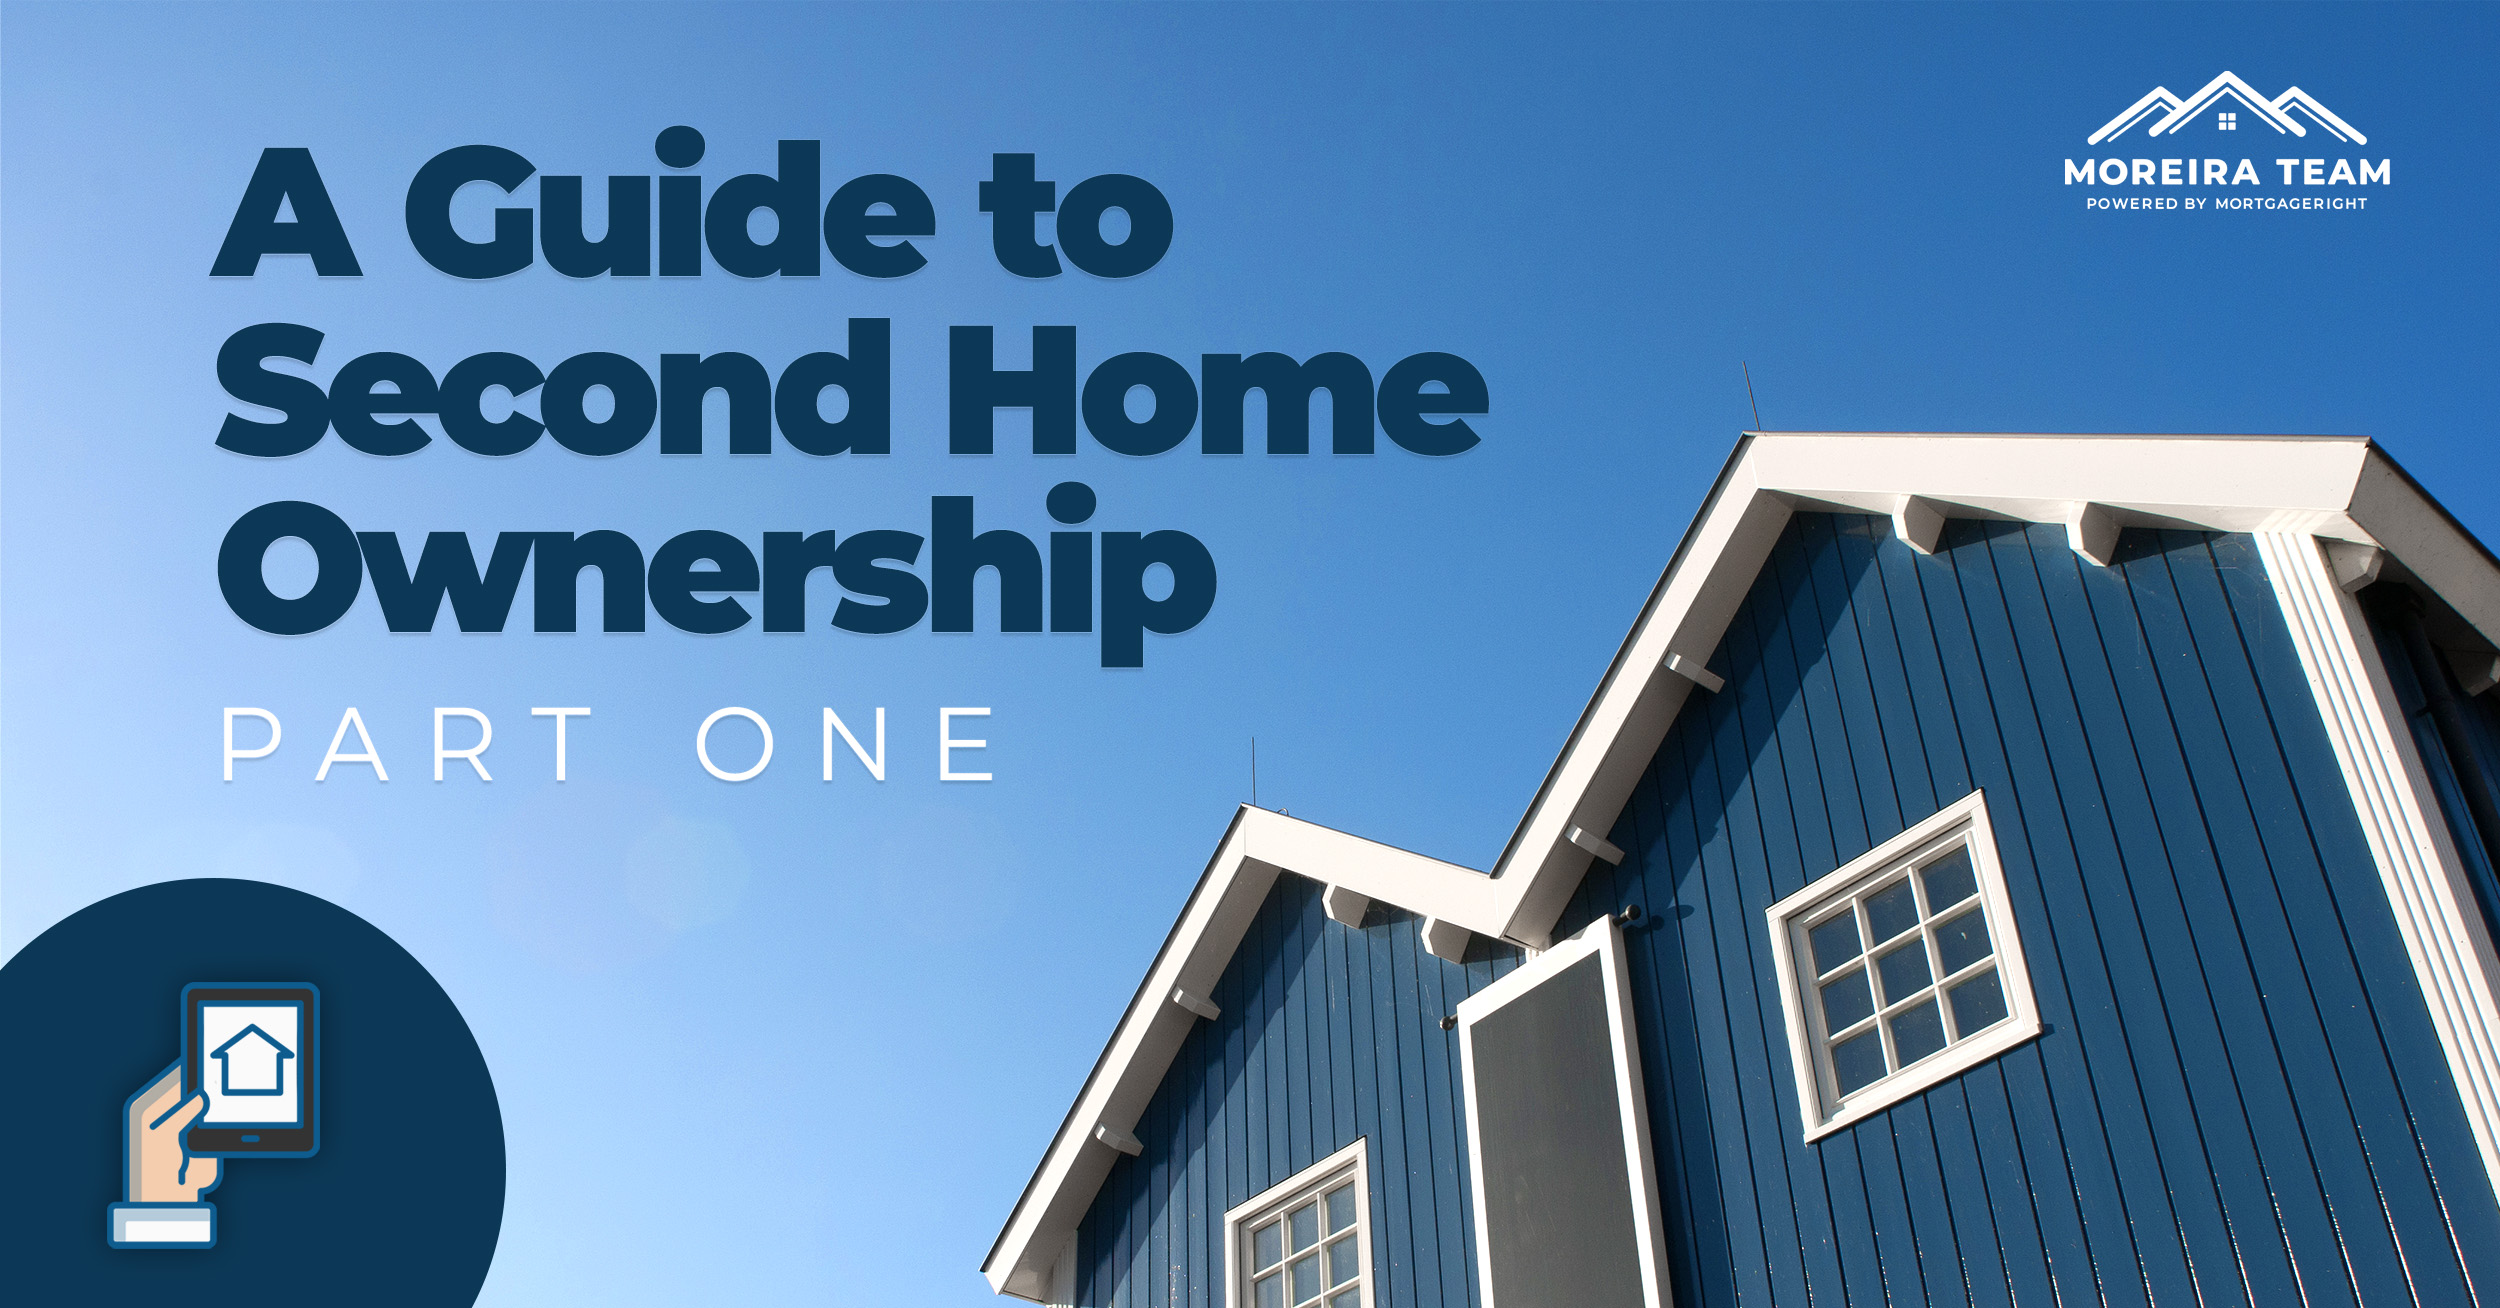 A guide to owning a second home.